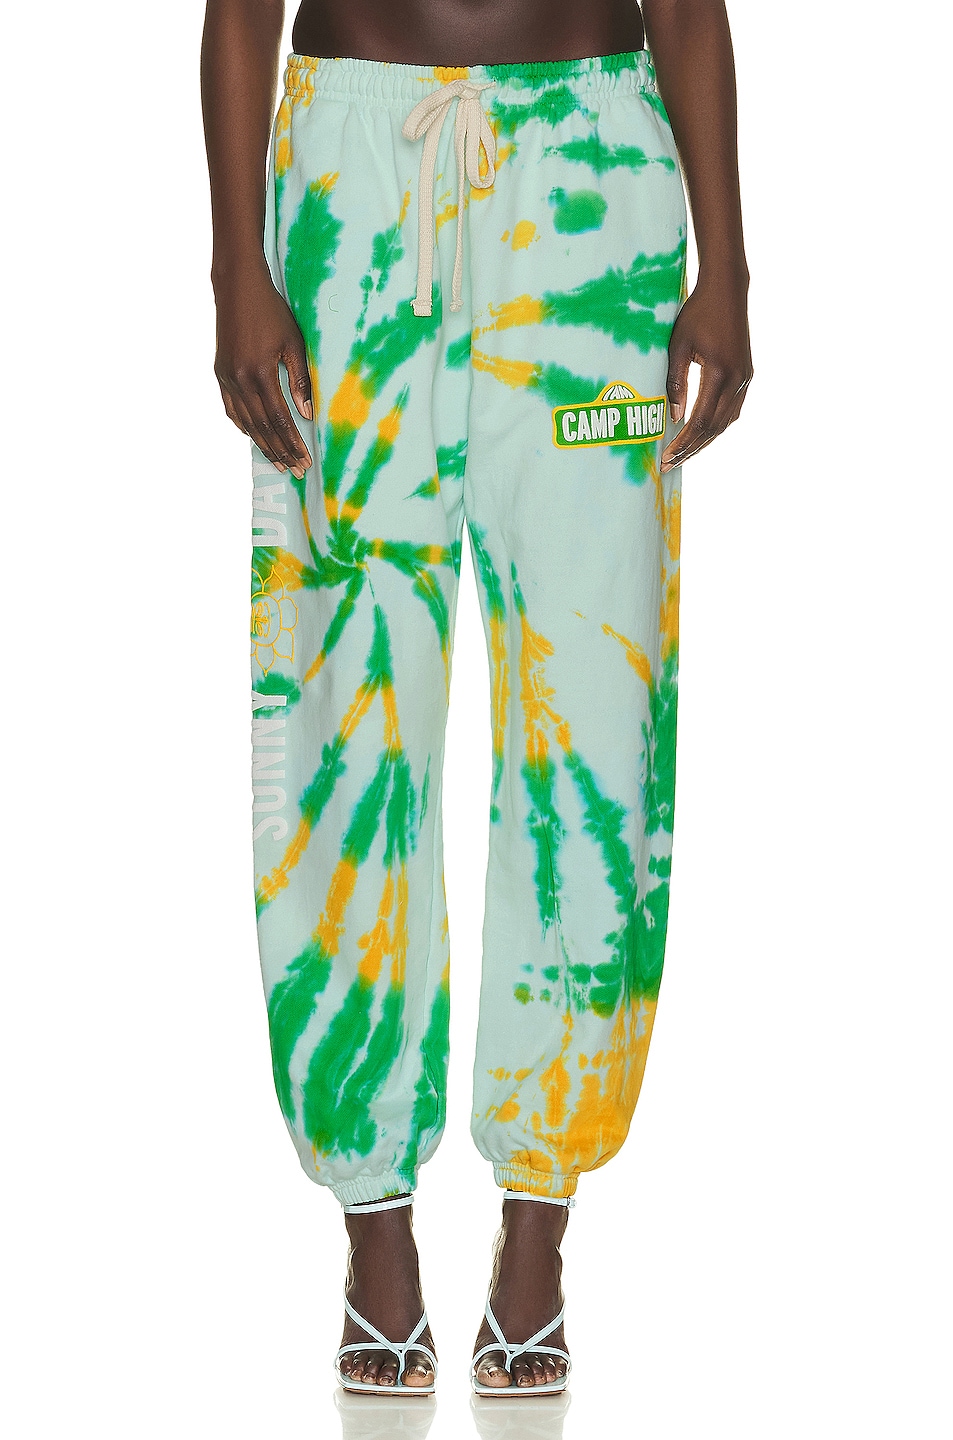 Image 1 of Camp High High Street Sweatpants In Kermit Green & Sunshine in Kermit Green & Sunshine